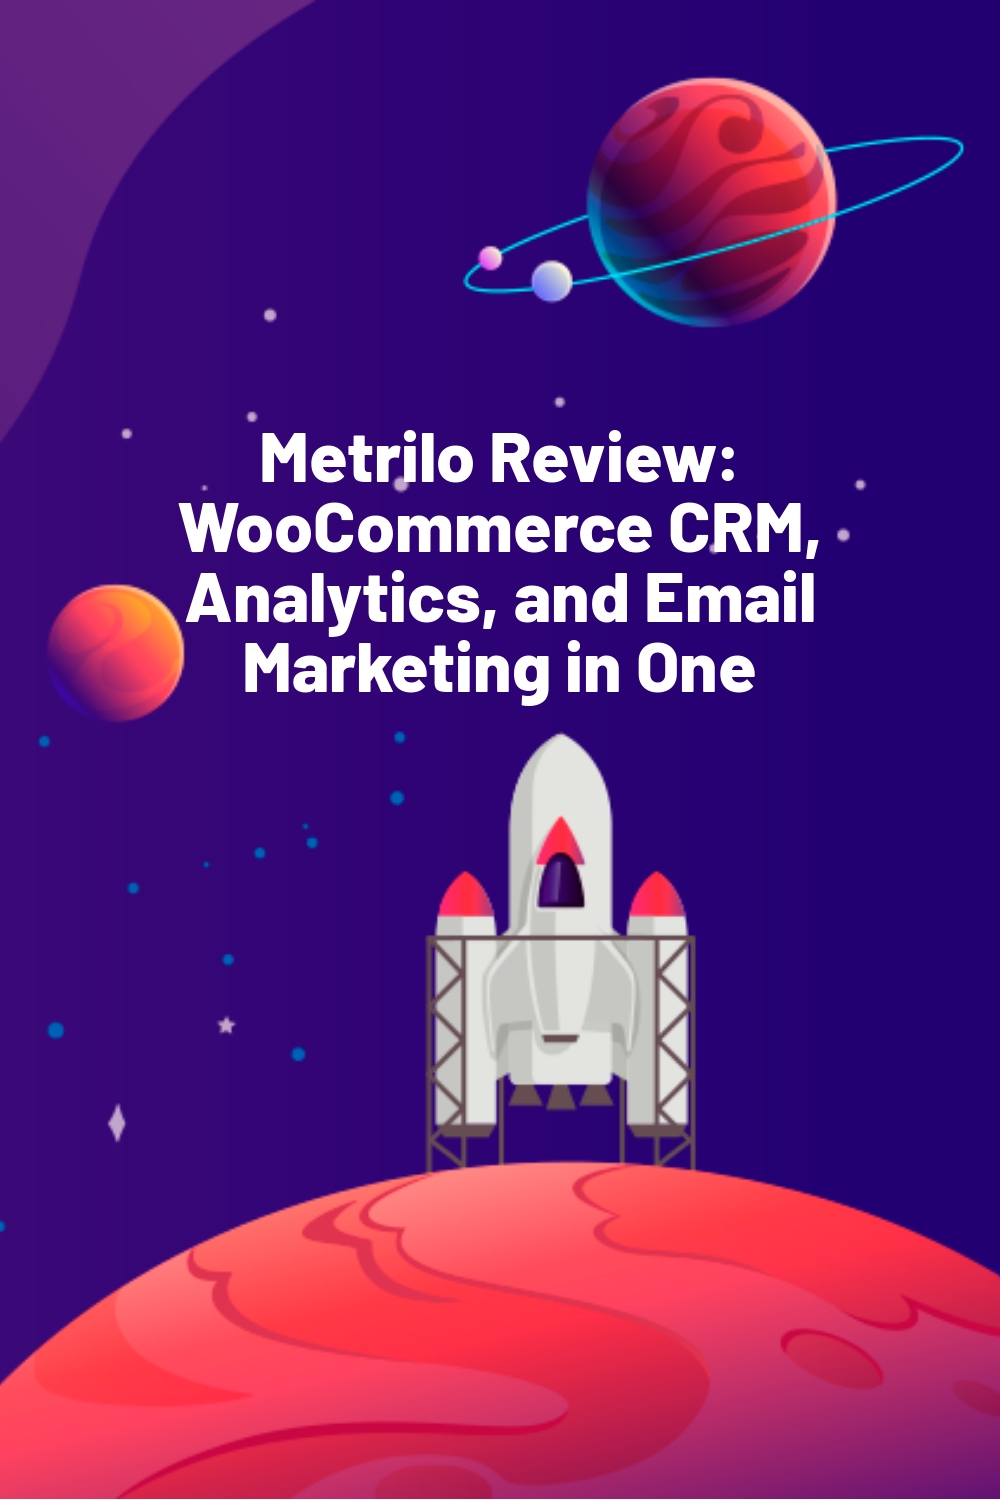 Metrilo Review: WooCommerce CRM, Analytics, and Email Marketing in One